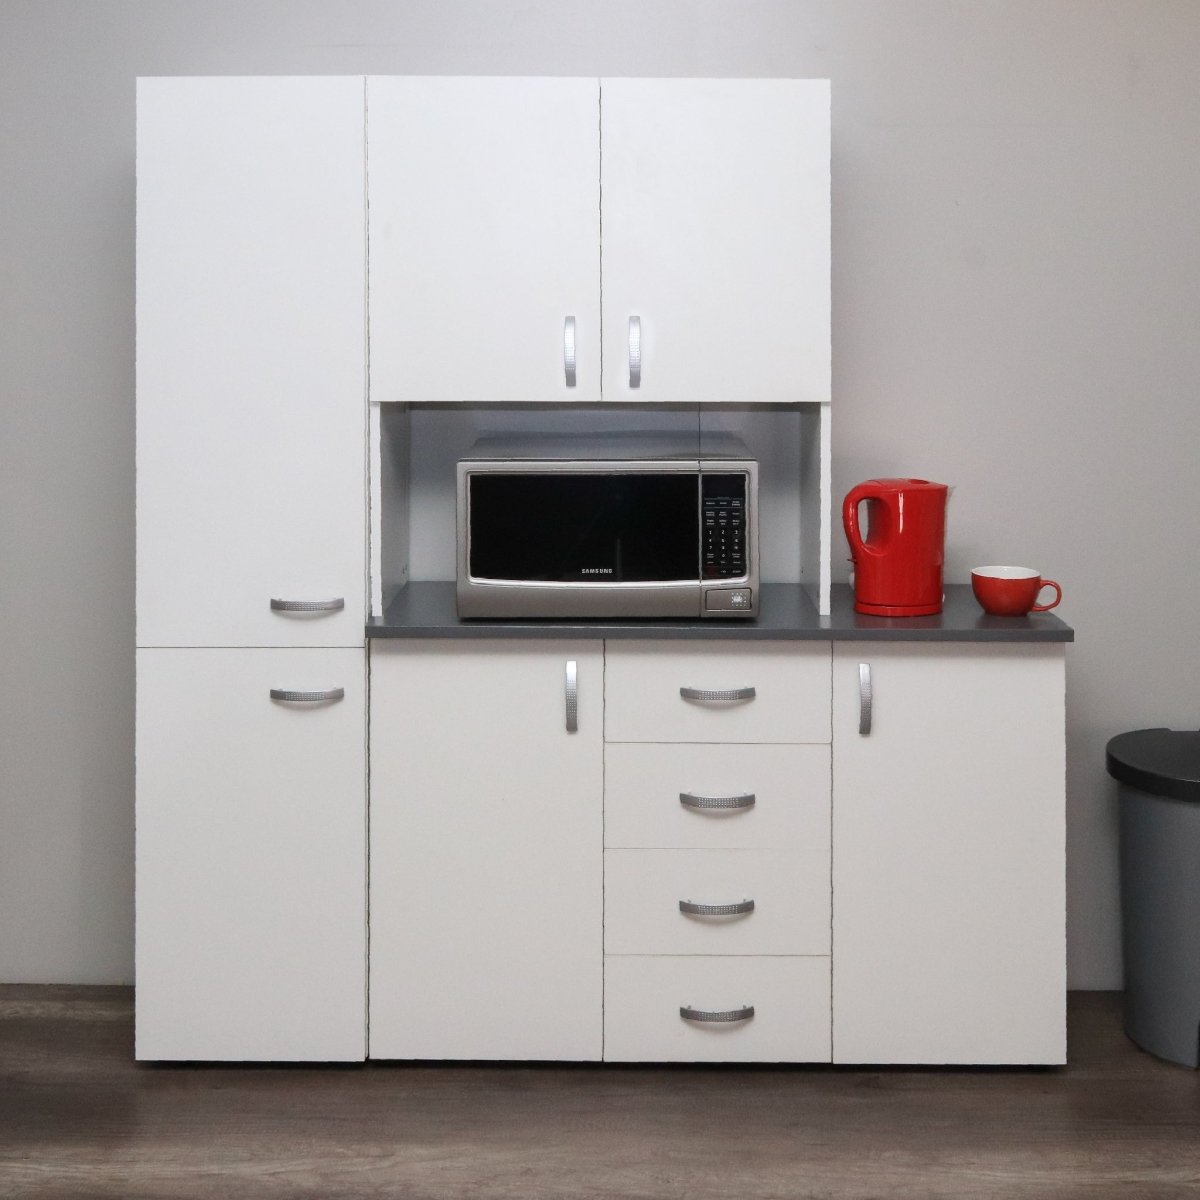 Compact Kitchen Units - What to Know Before You Buy